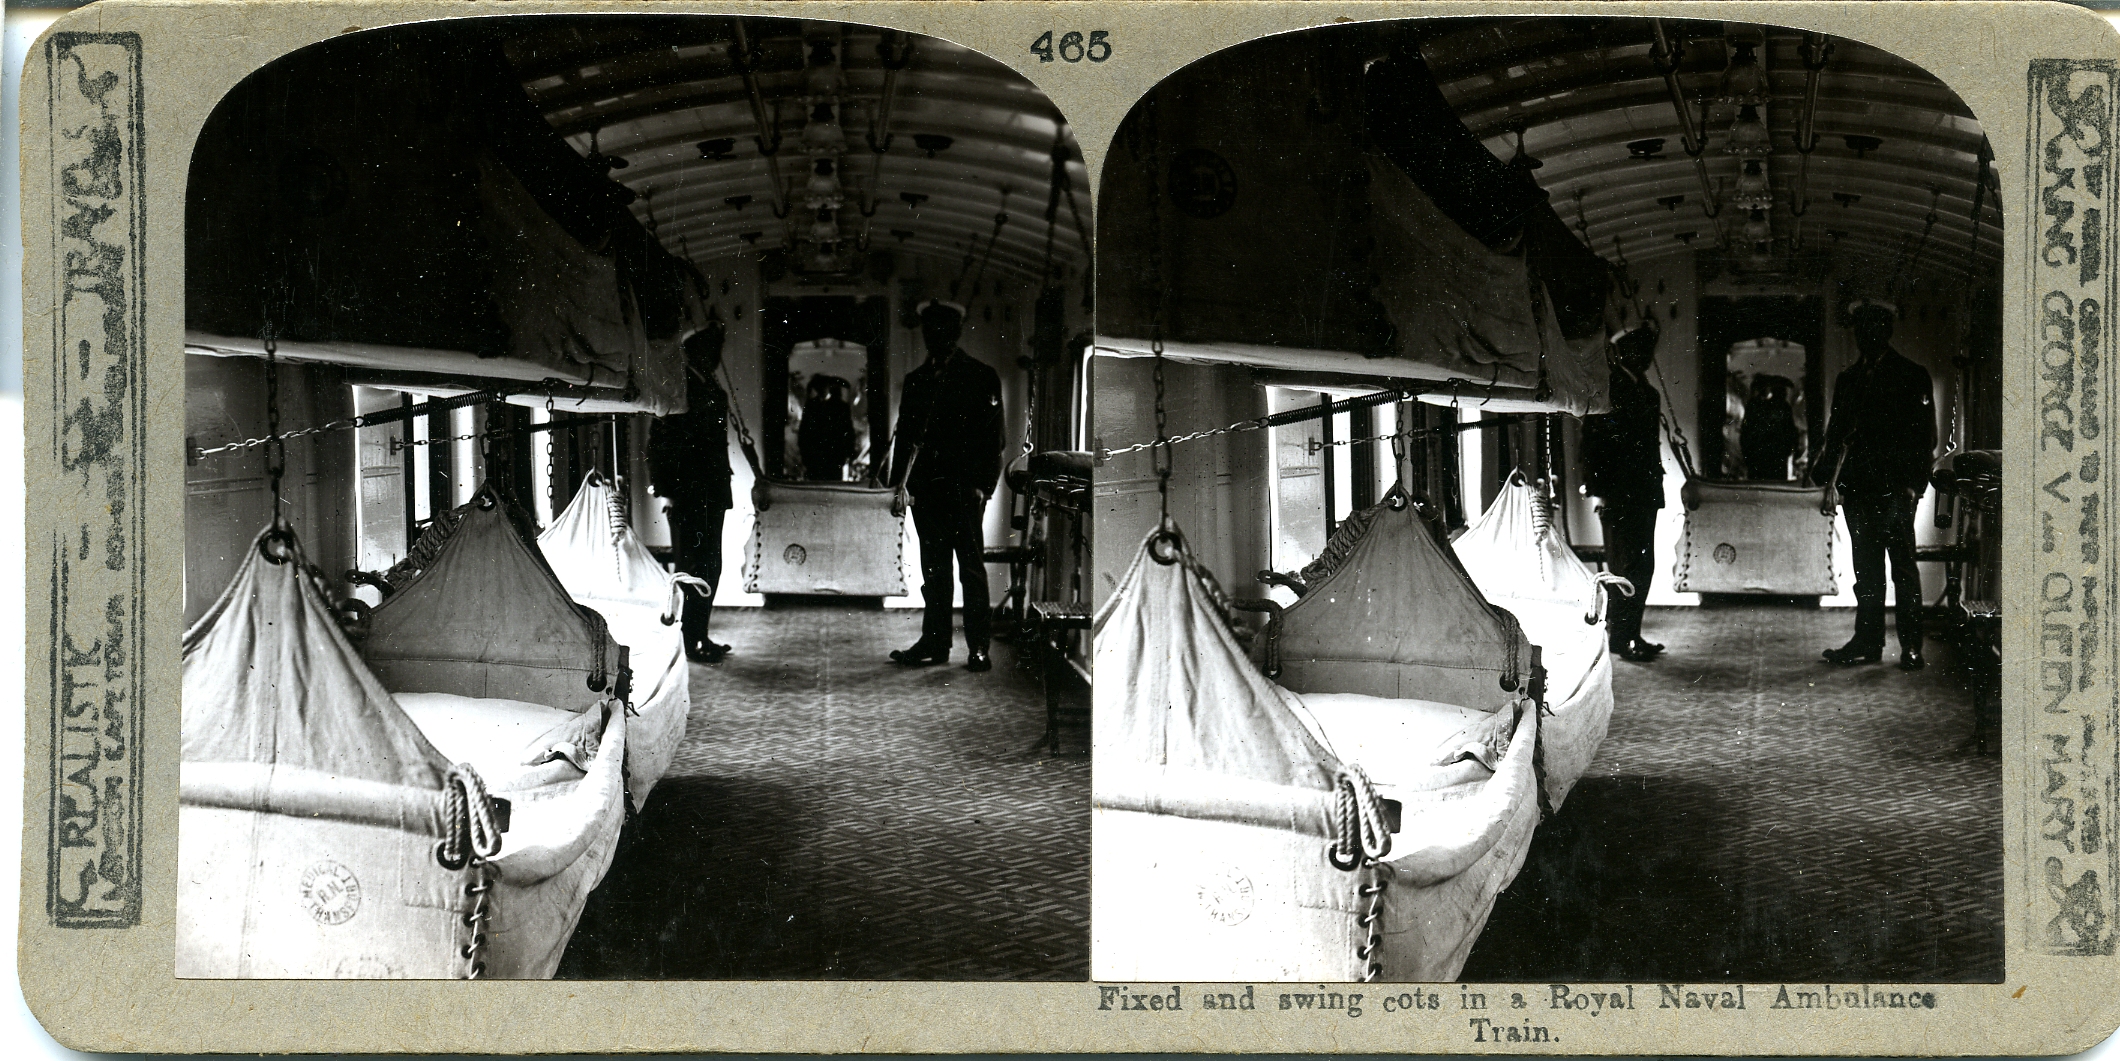 Fixed and swing cots in a Royal Naval Ambulance Train